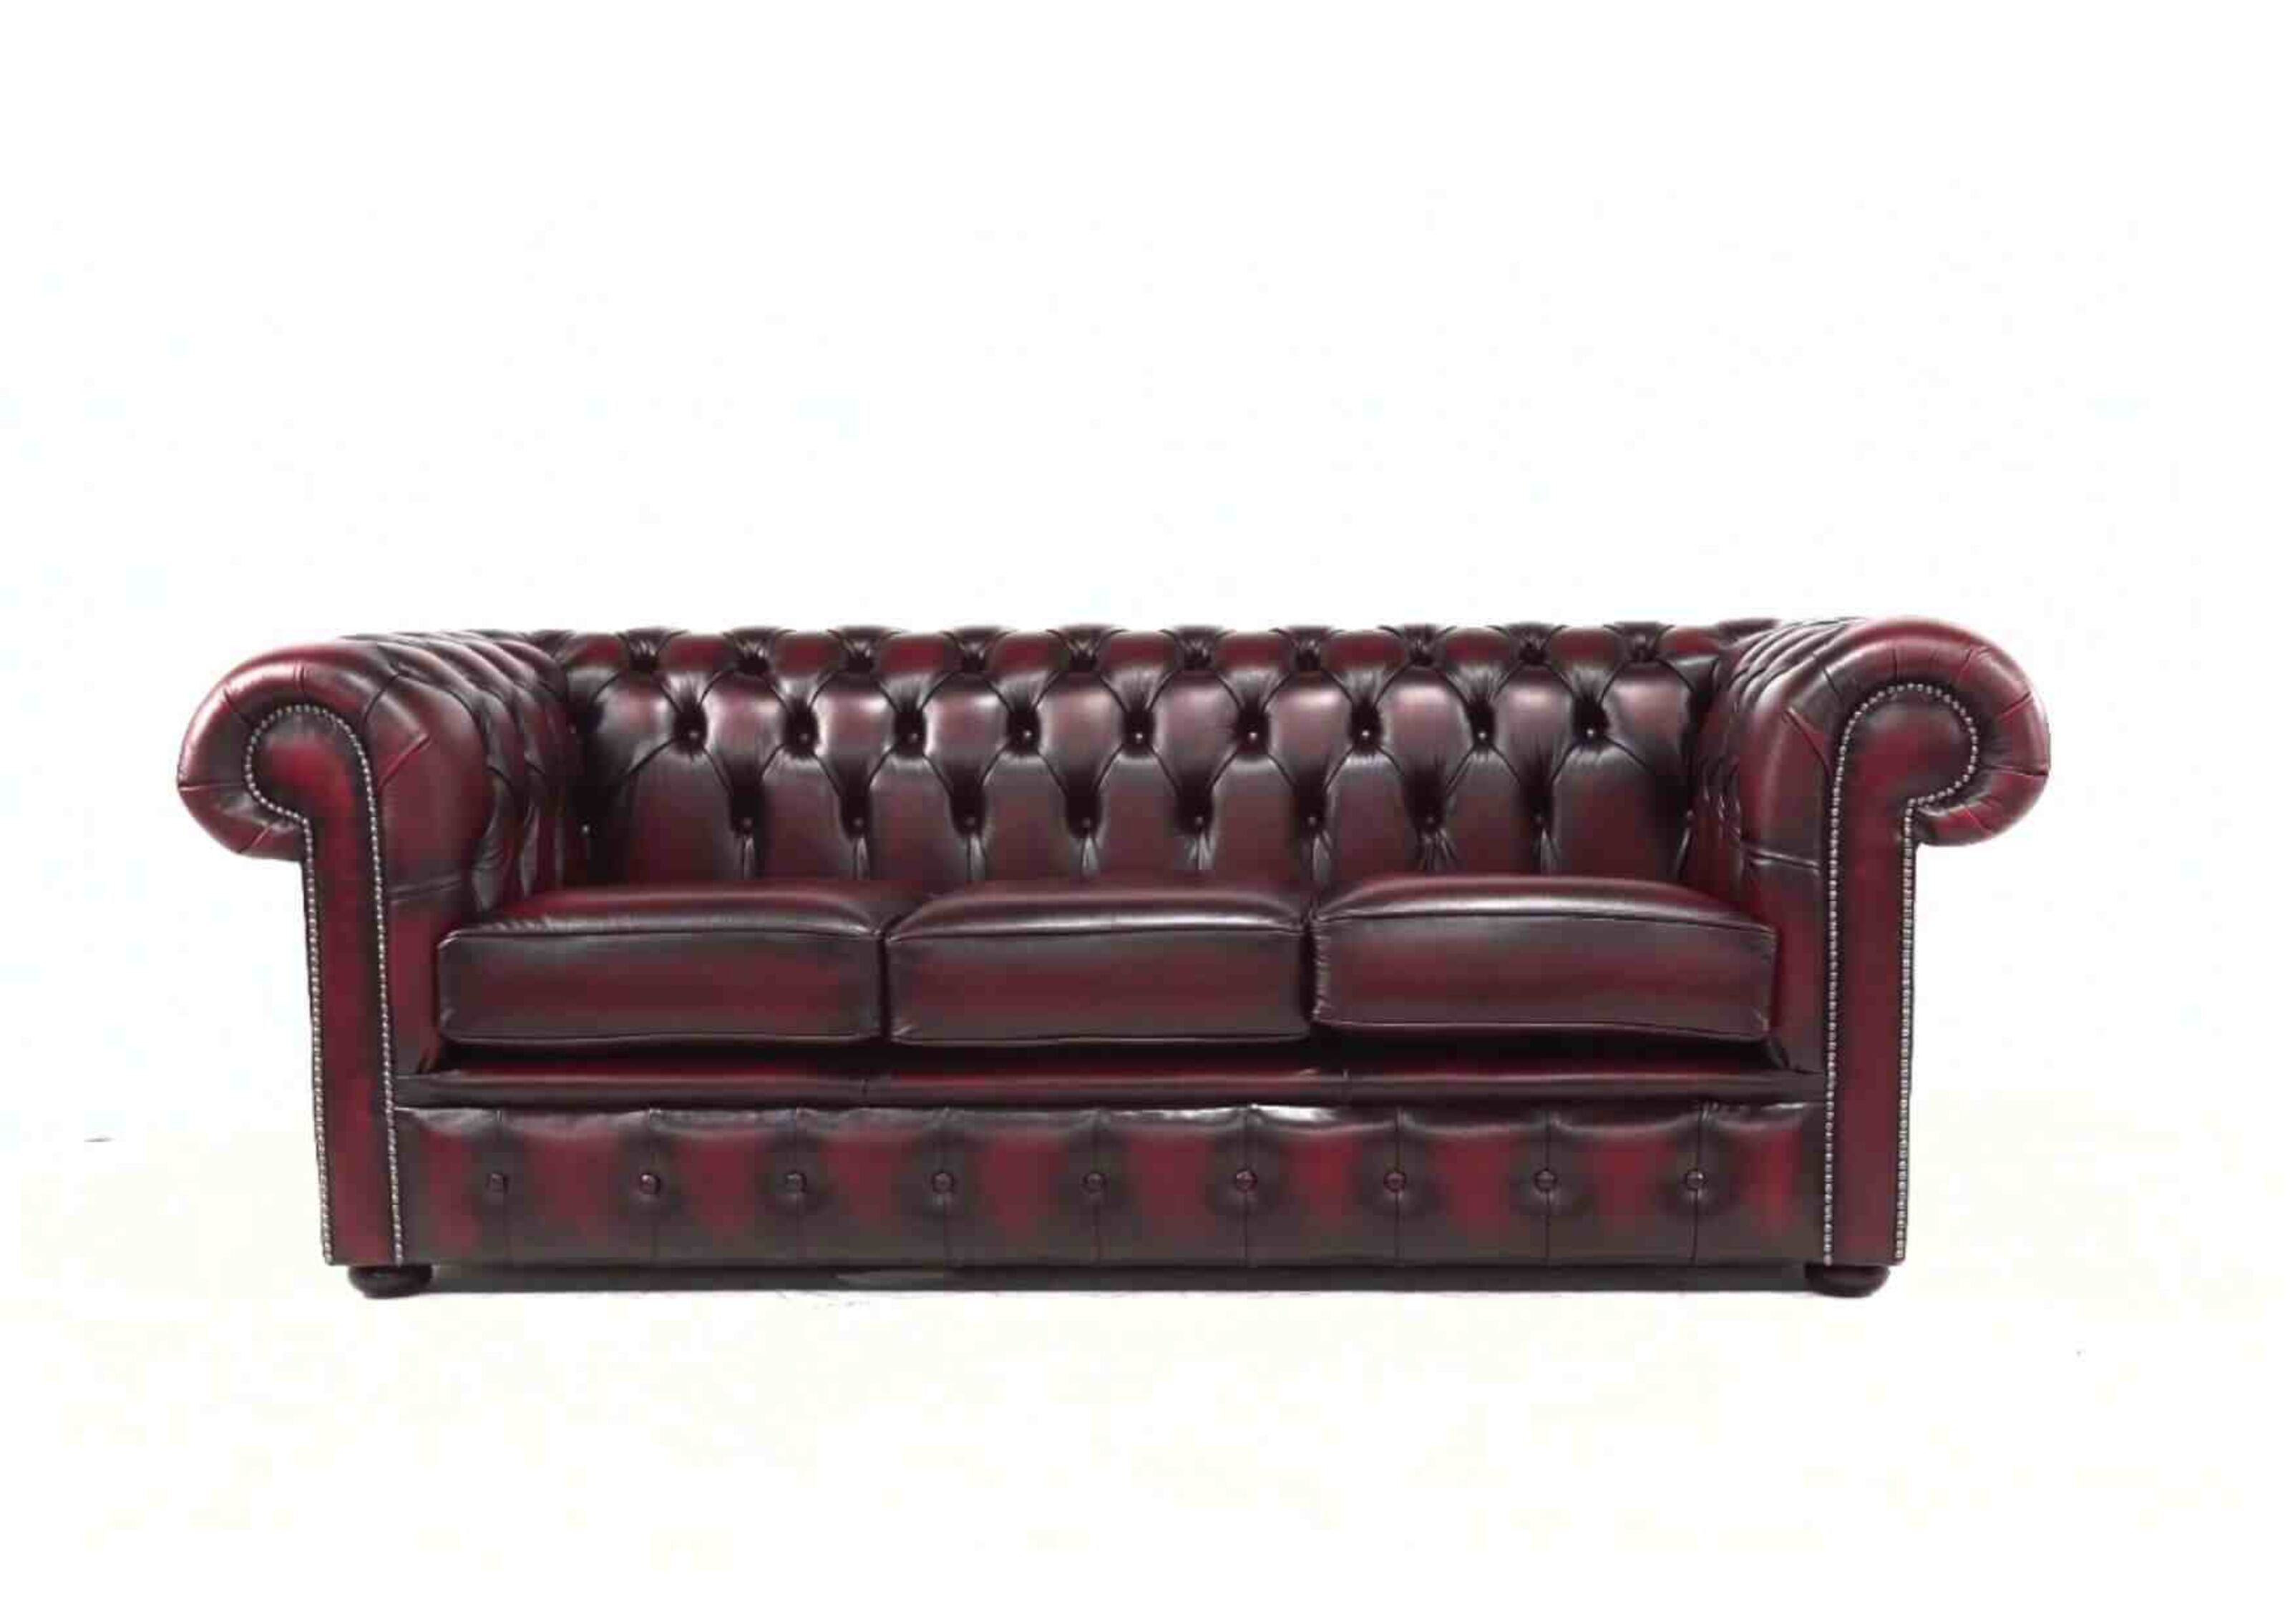 Kaki Chesterfield Sofas for Your Home  %Post Title